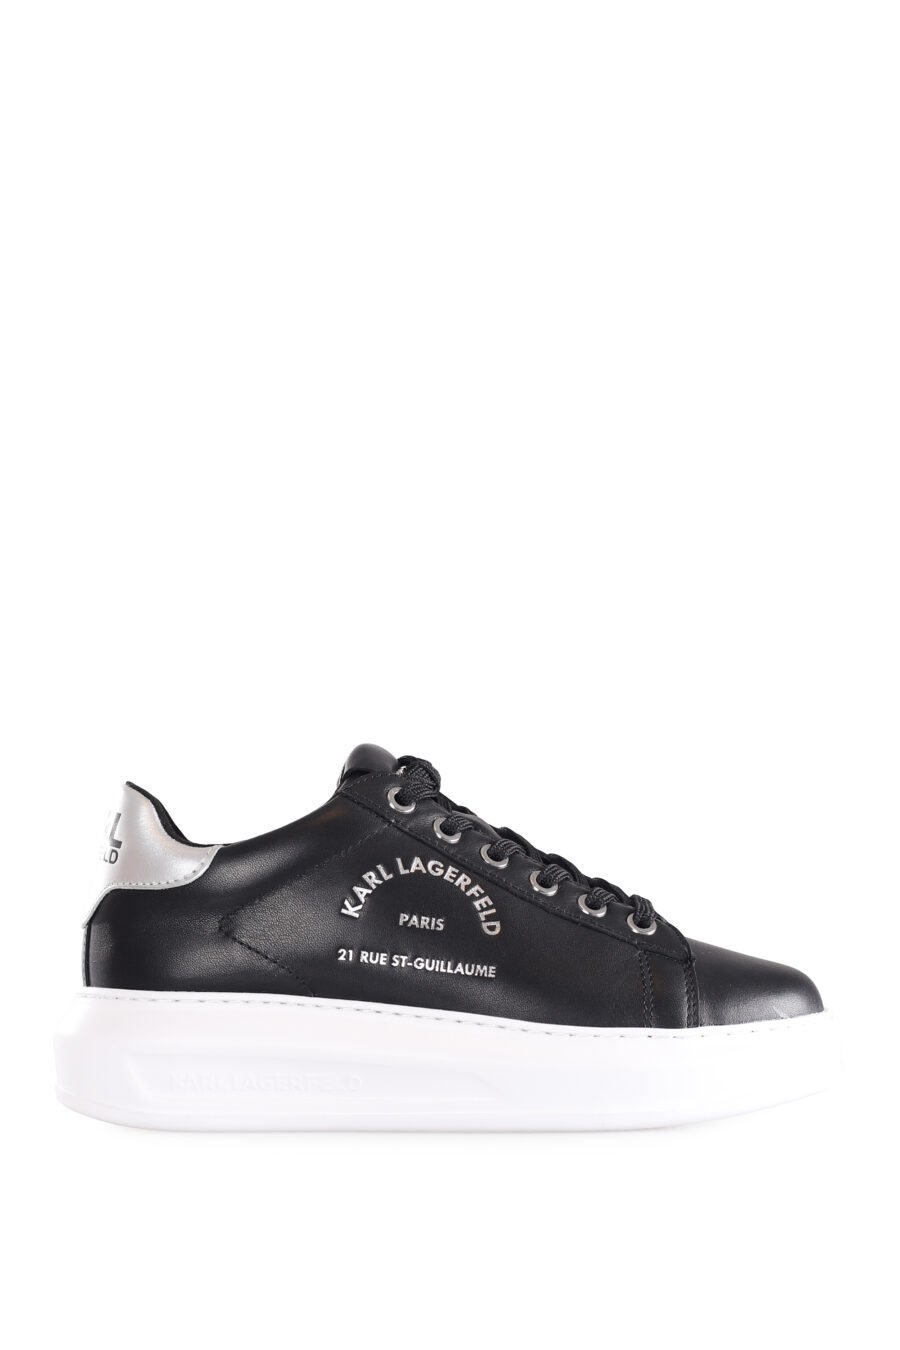 Black trainers with silver metal lettering logo - IMG 9566